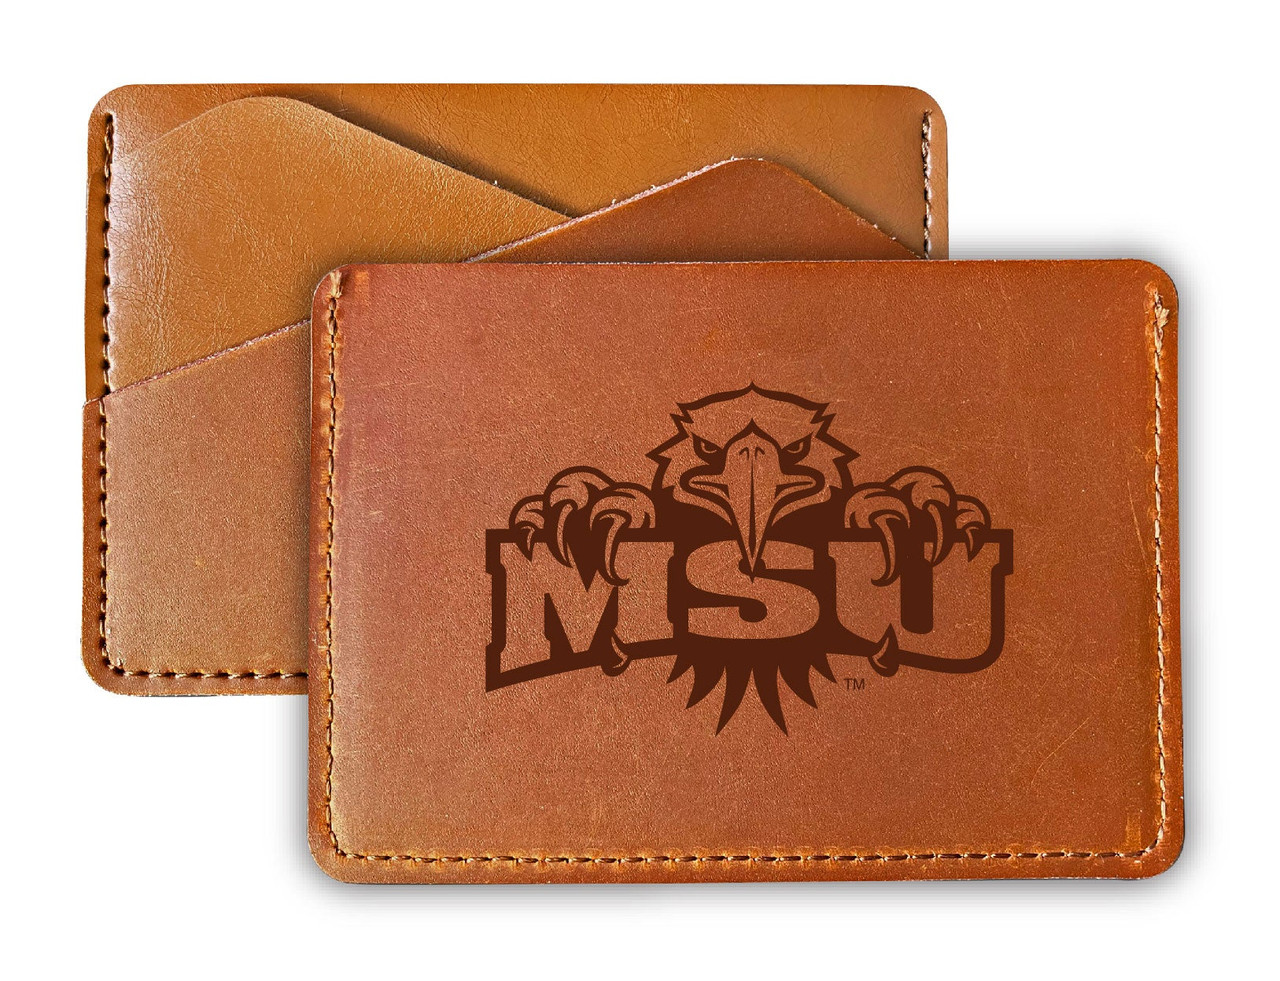 Morehead State University College Leather Card Holder Wallet